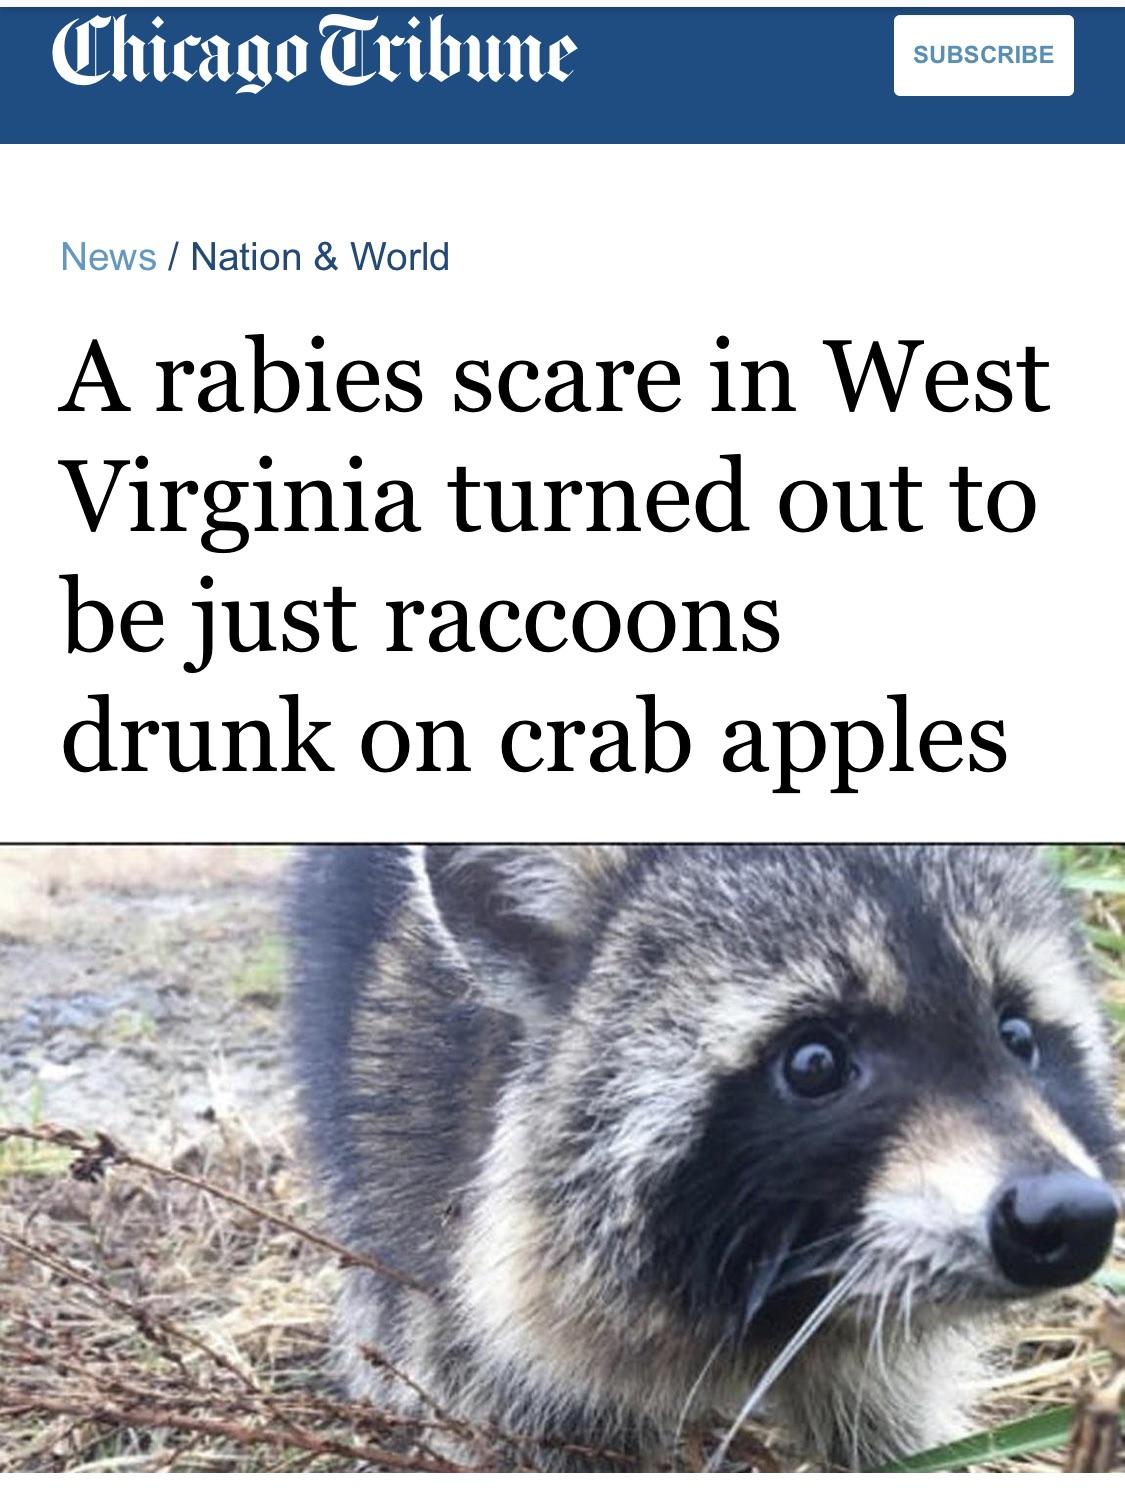 Roses are red, churches have chapels,